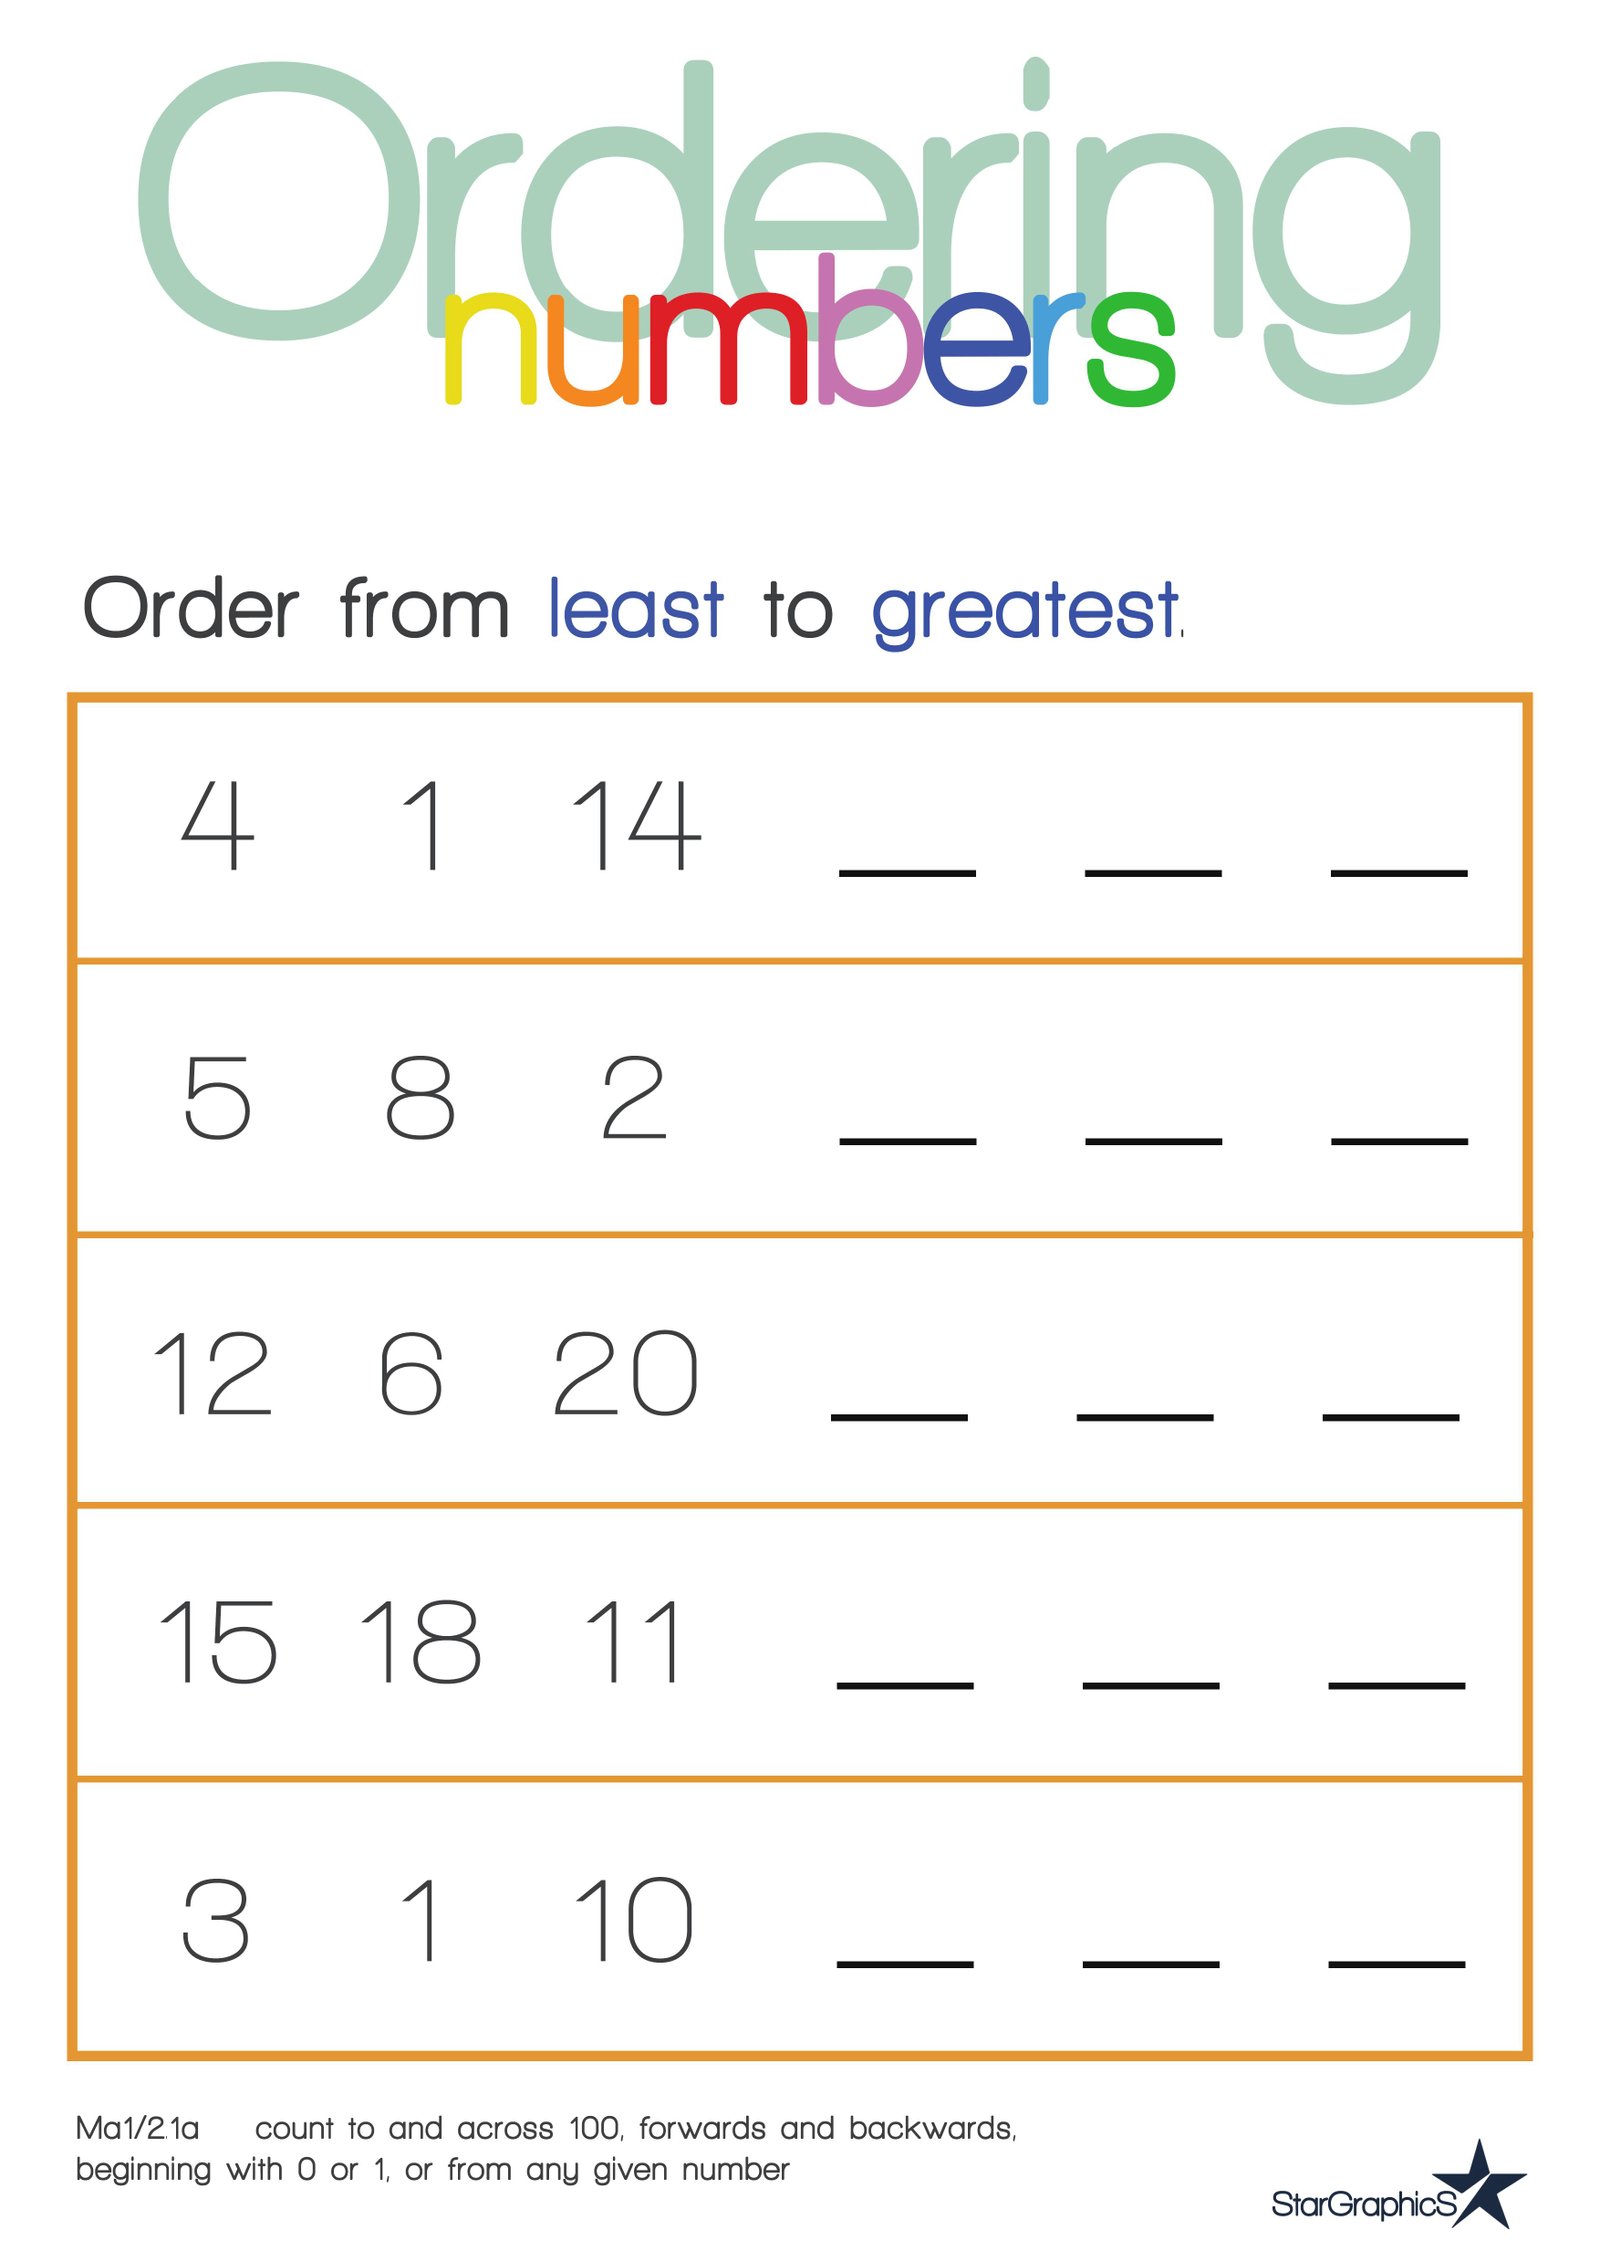 Ordering Numbers - Least to Greatest